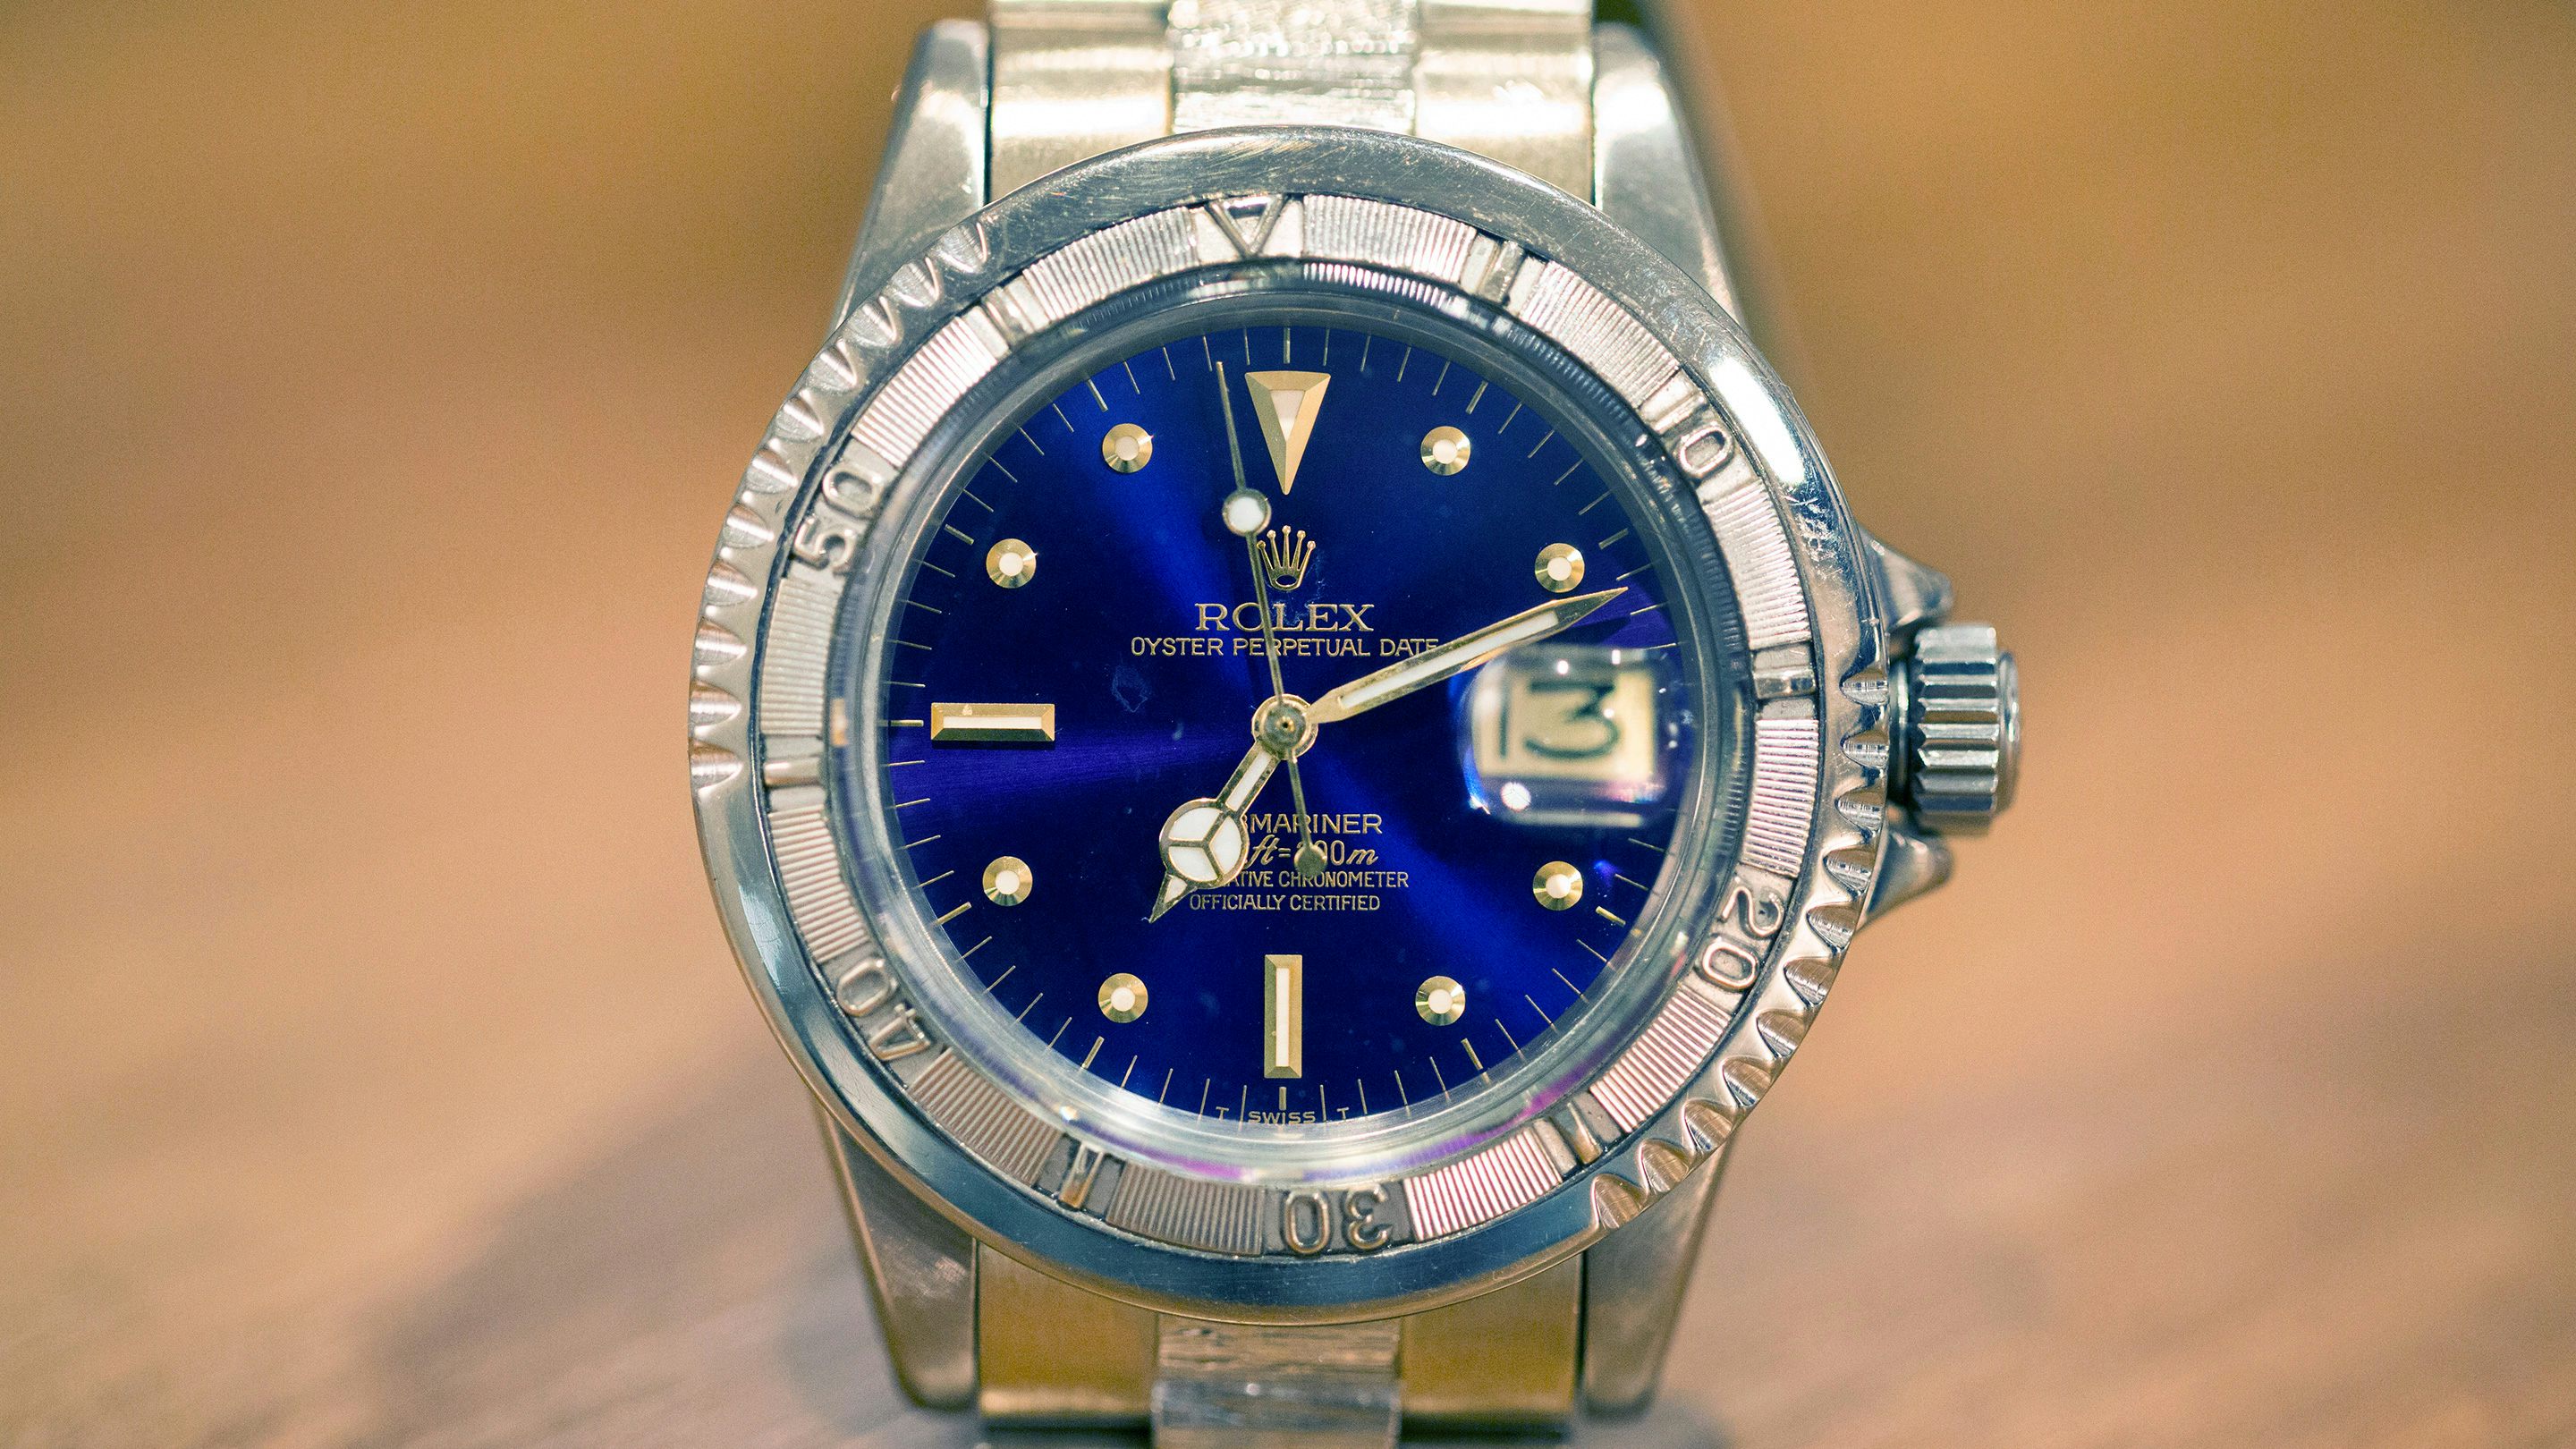 This Very Strange White Gold Prototype Is The Expensive Submariner In The World - Hodinkee